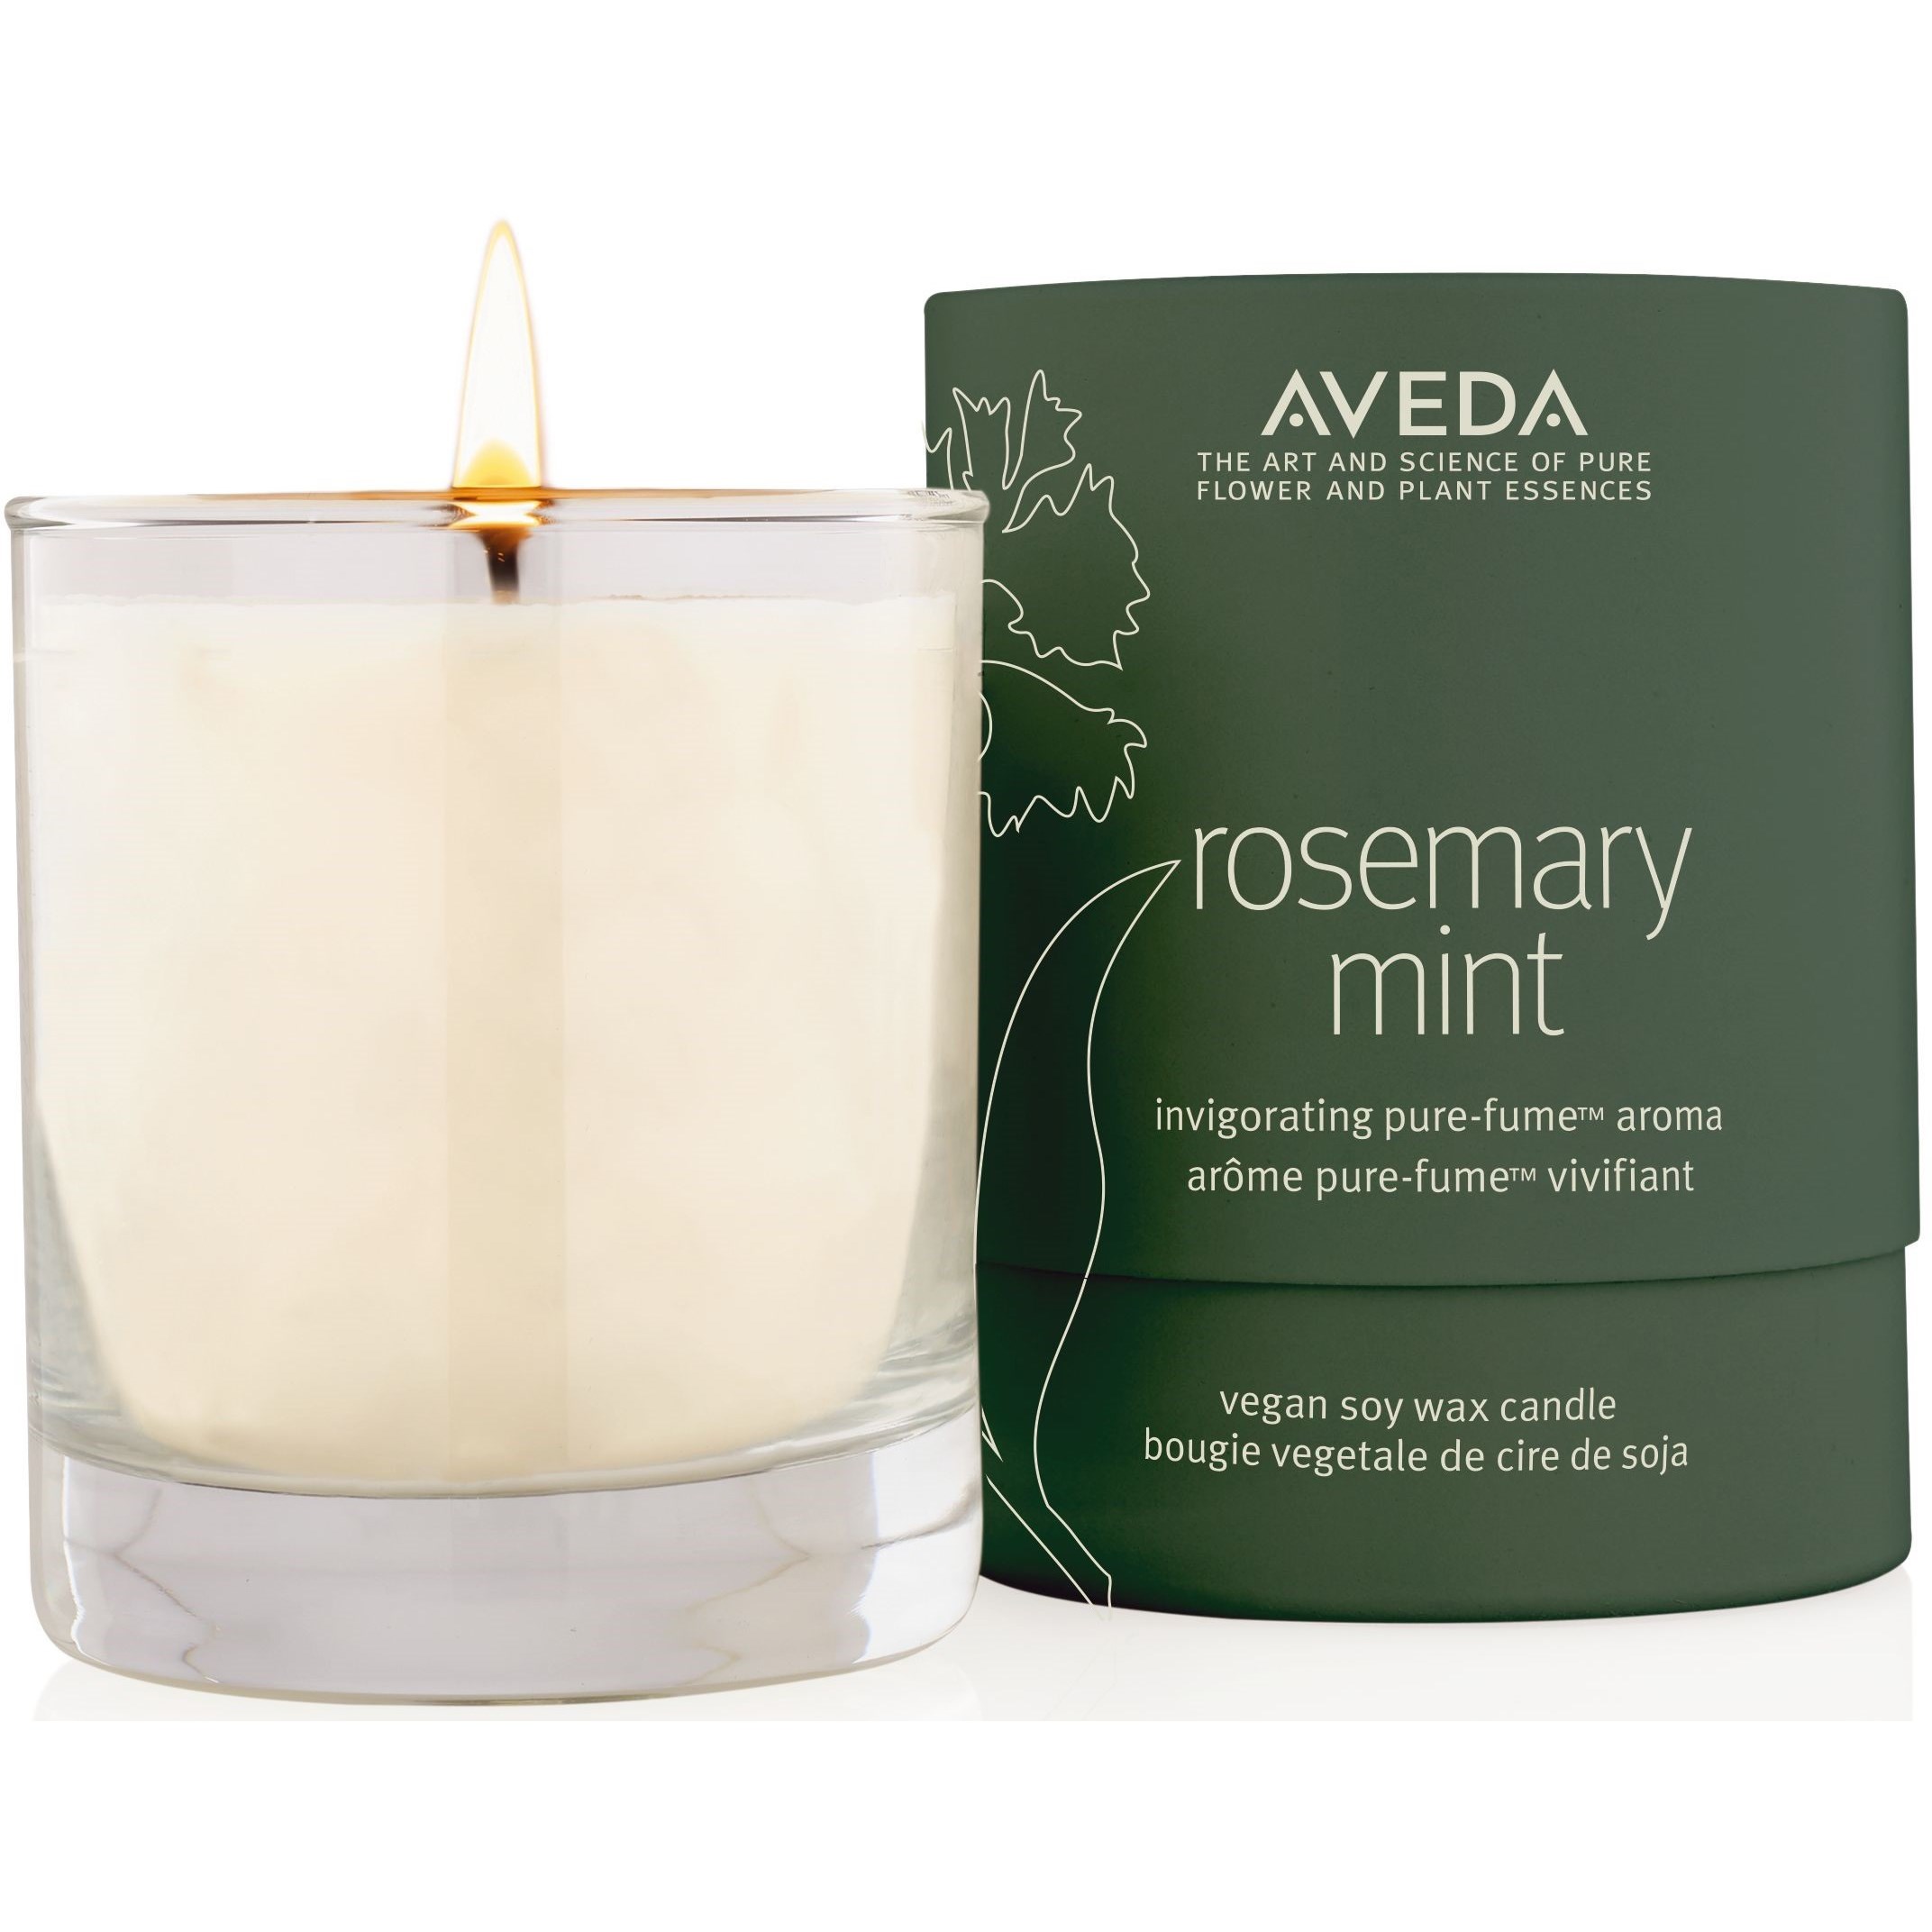 AVEDA Rosemary Mint soy wax candle